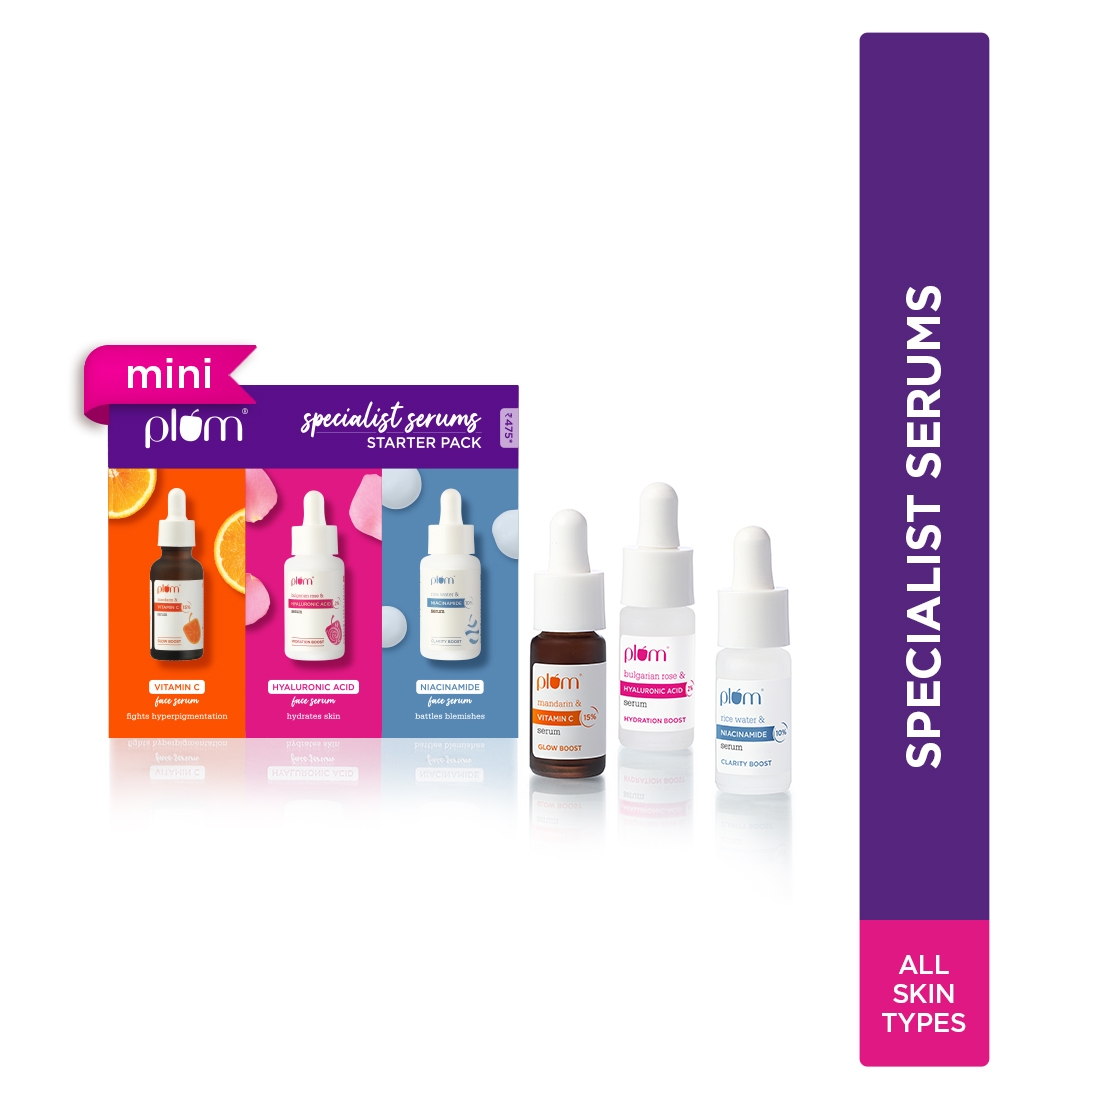 Specialist Serums - Starter Pack | Set of 5 Mini Serums |For Glowing, Hydrated, Clear, Smooth & Even-toned Skin